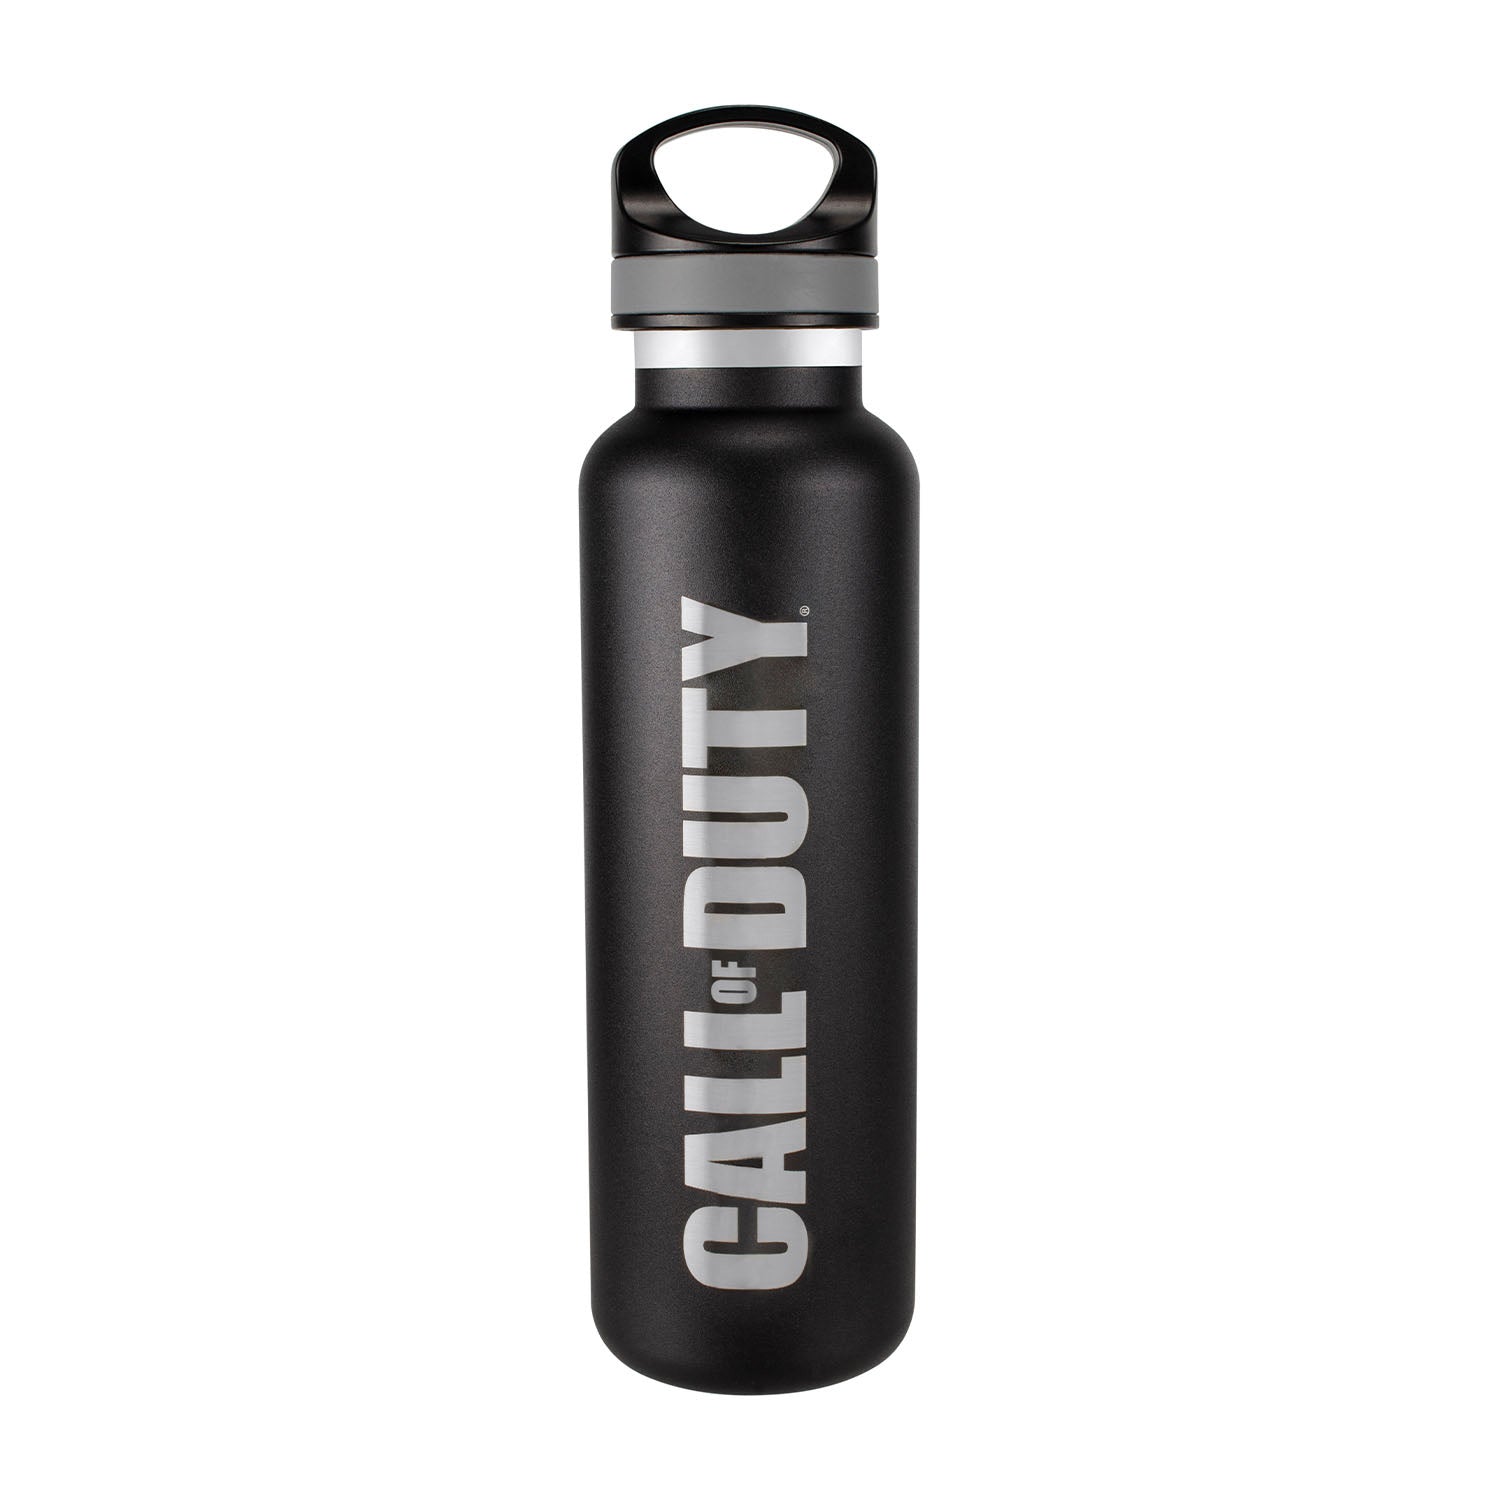 Call of Duty 20oz Tundra Bottle - Front View